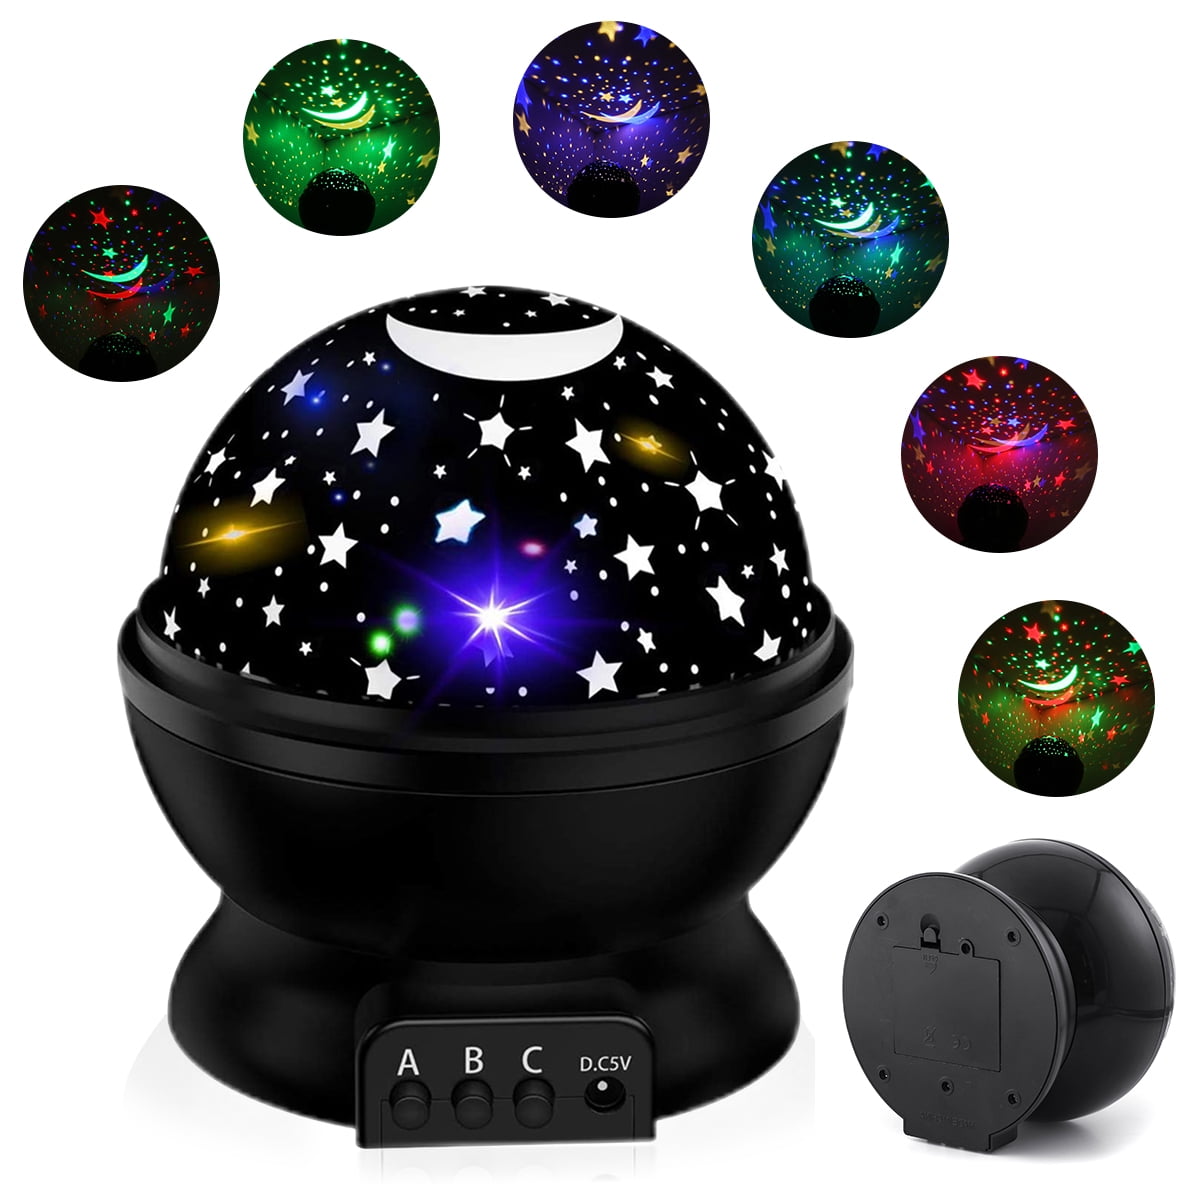 Details about   Rotating LED Night Light Projector for Kids Moon Star Night Light Bedside Lamps 